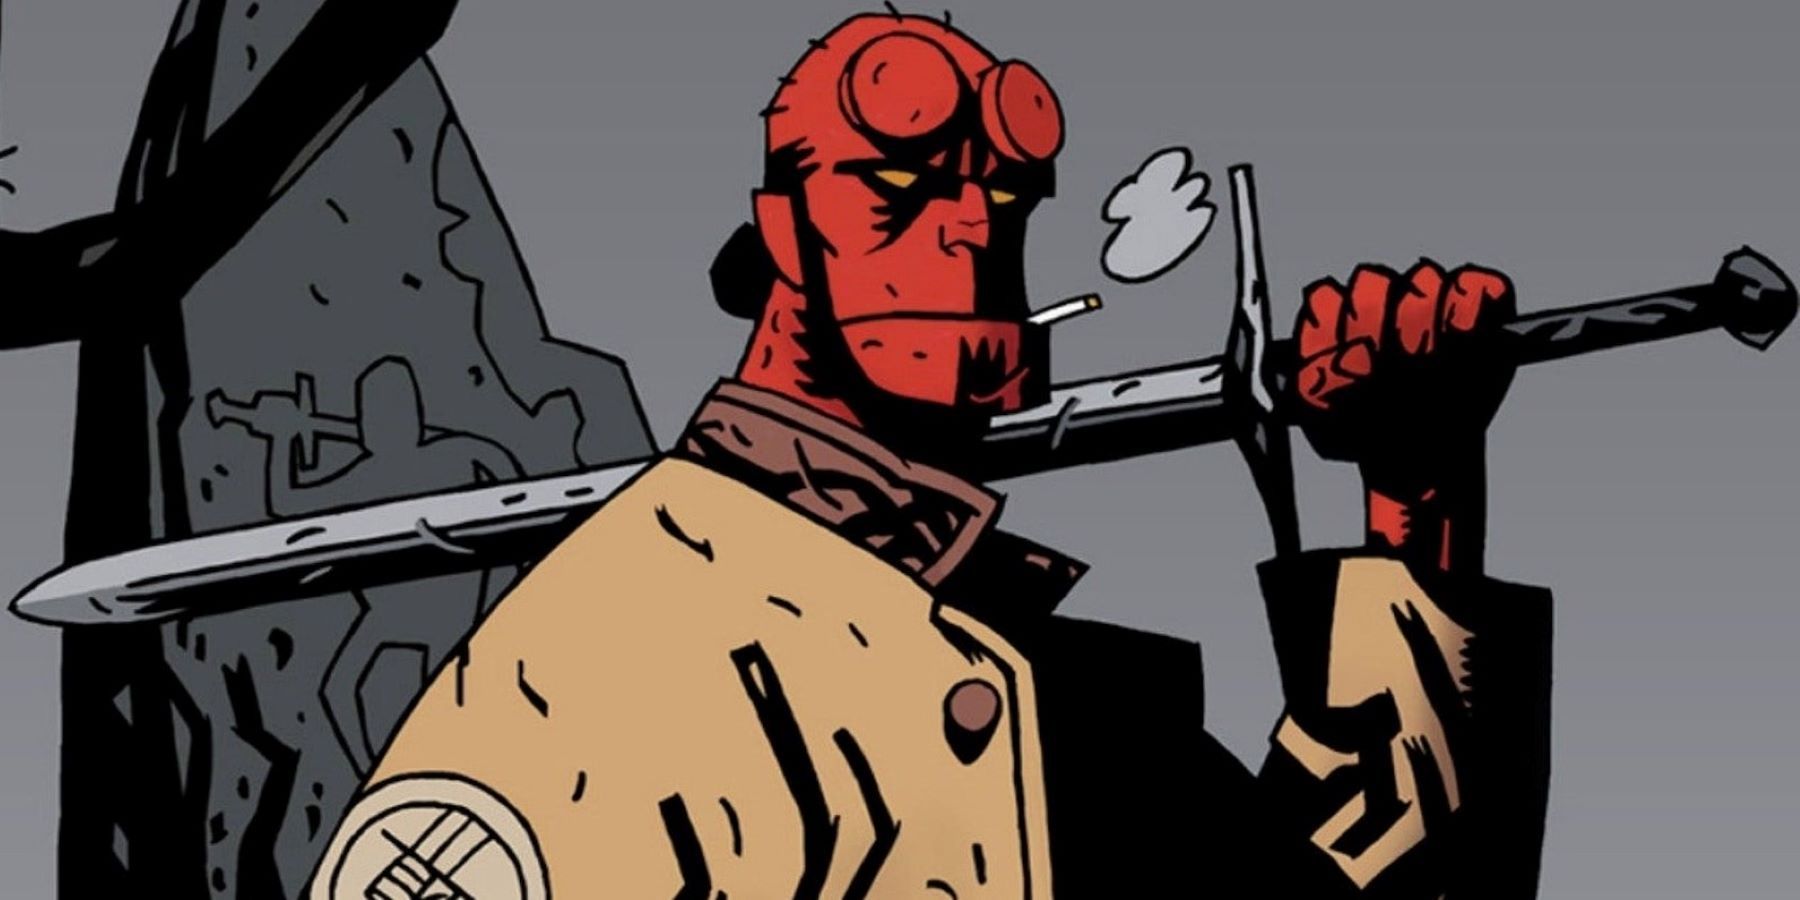 Hellboy smoking a cigarette and holding a sword